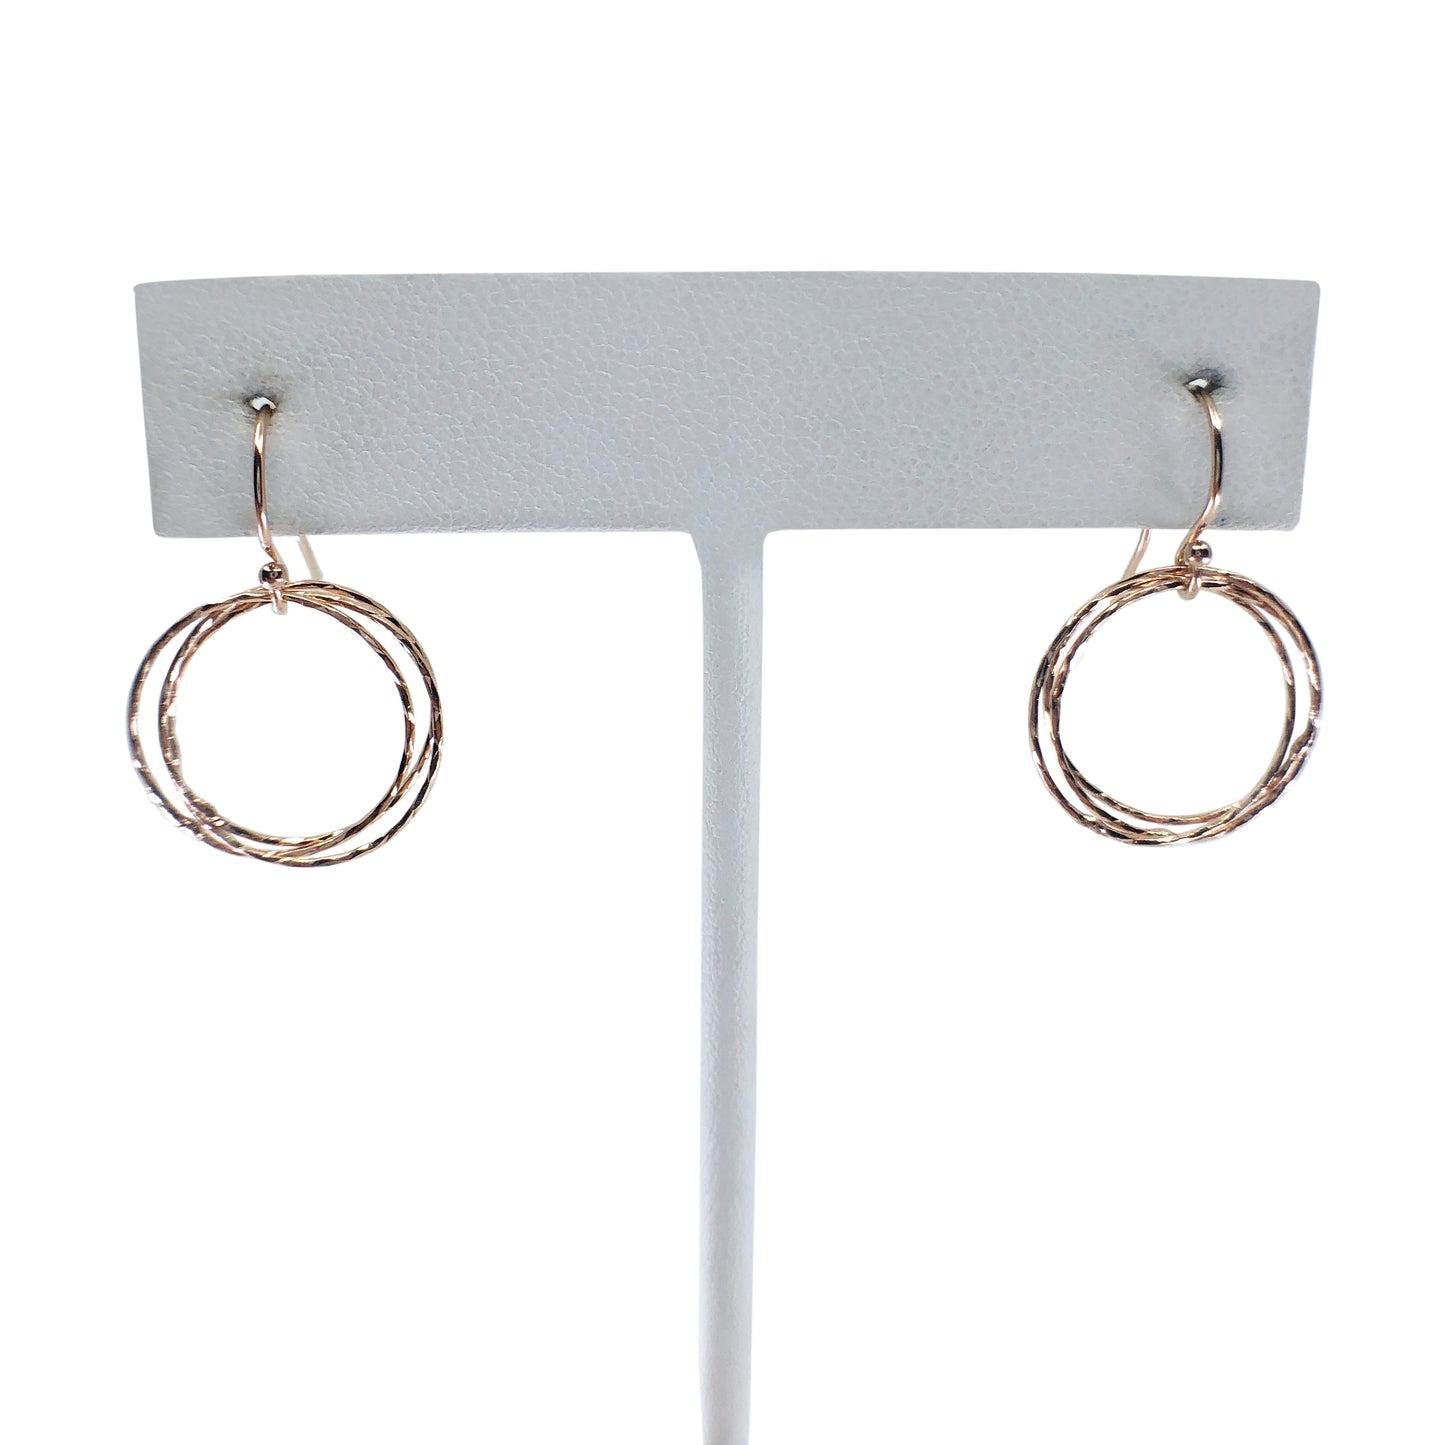 Gold triple circle earrings on earring stand with white background.